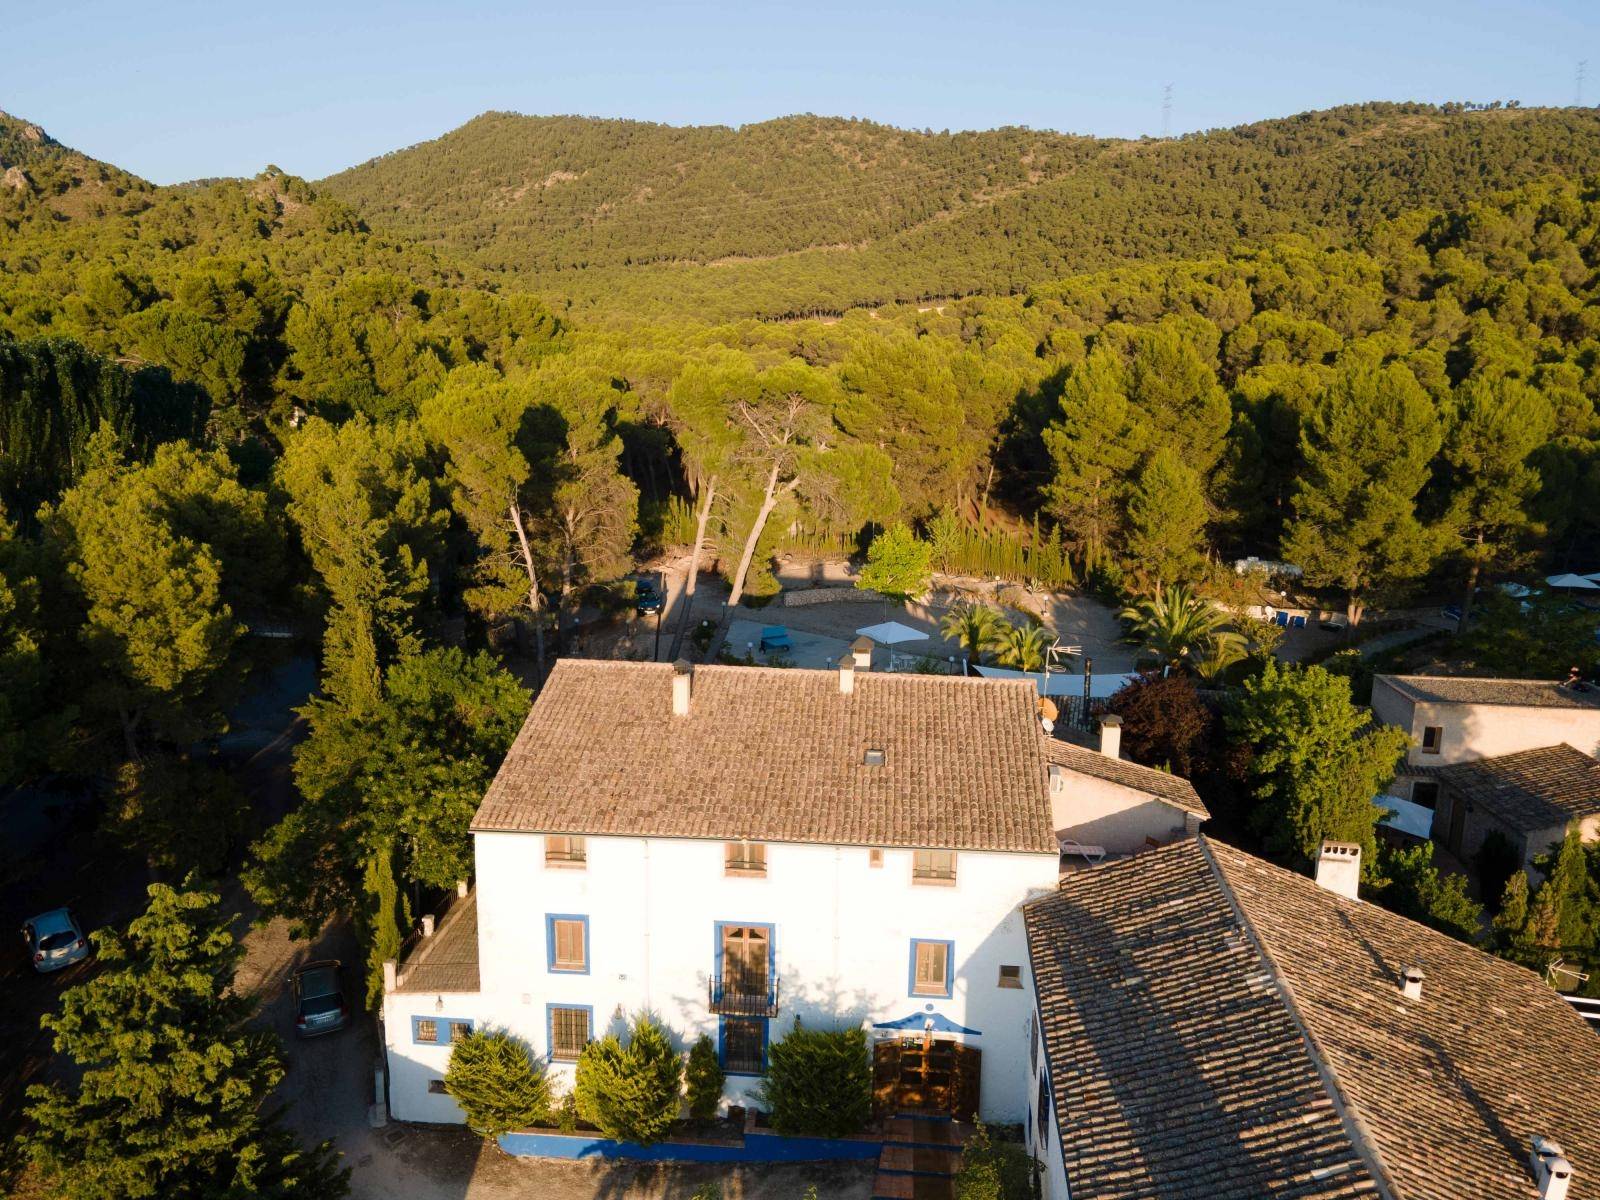 RURAL HOTEL IN THE MIDDLE OF NATURE IN BIAR - ALICANTE